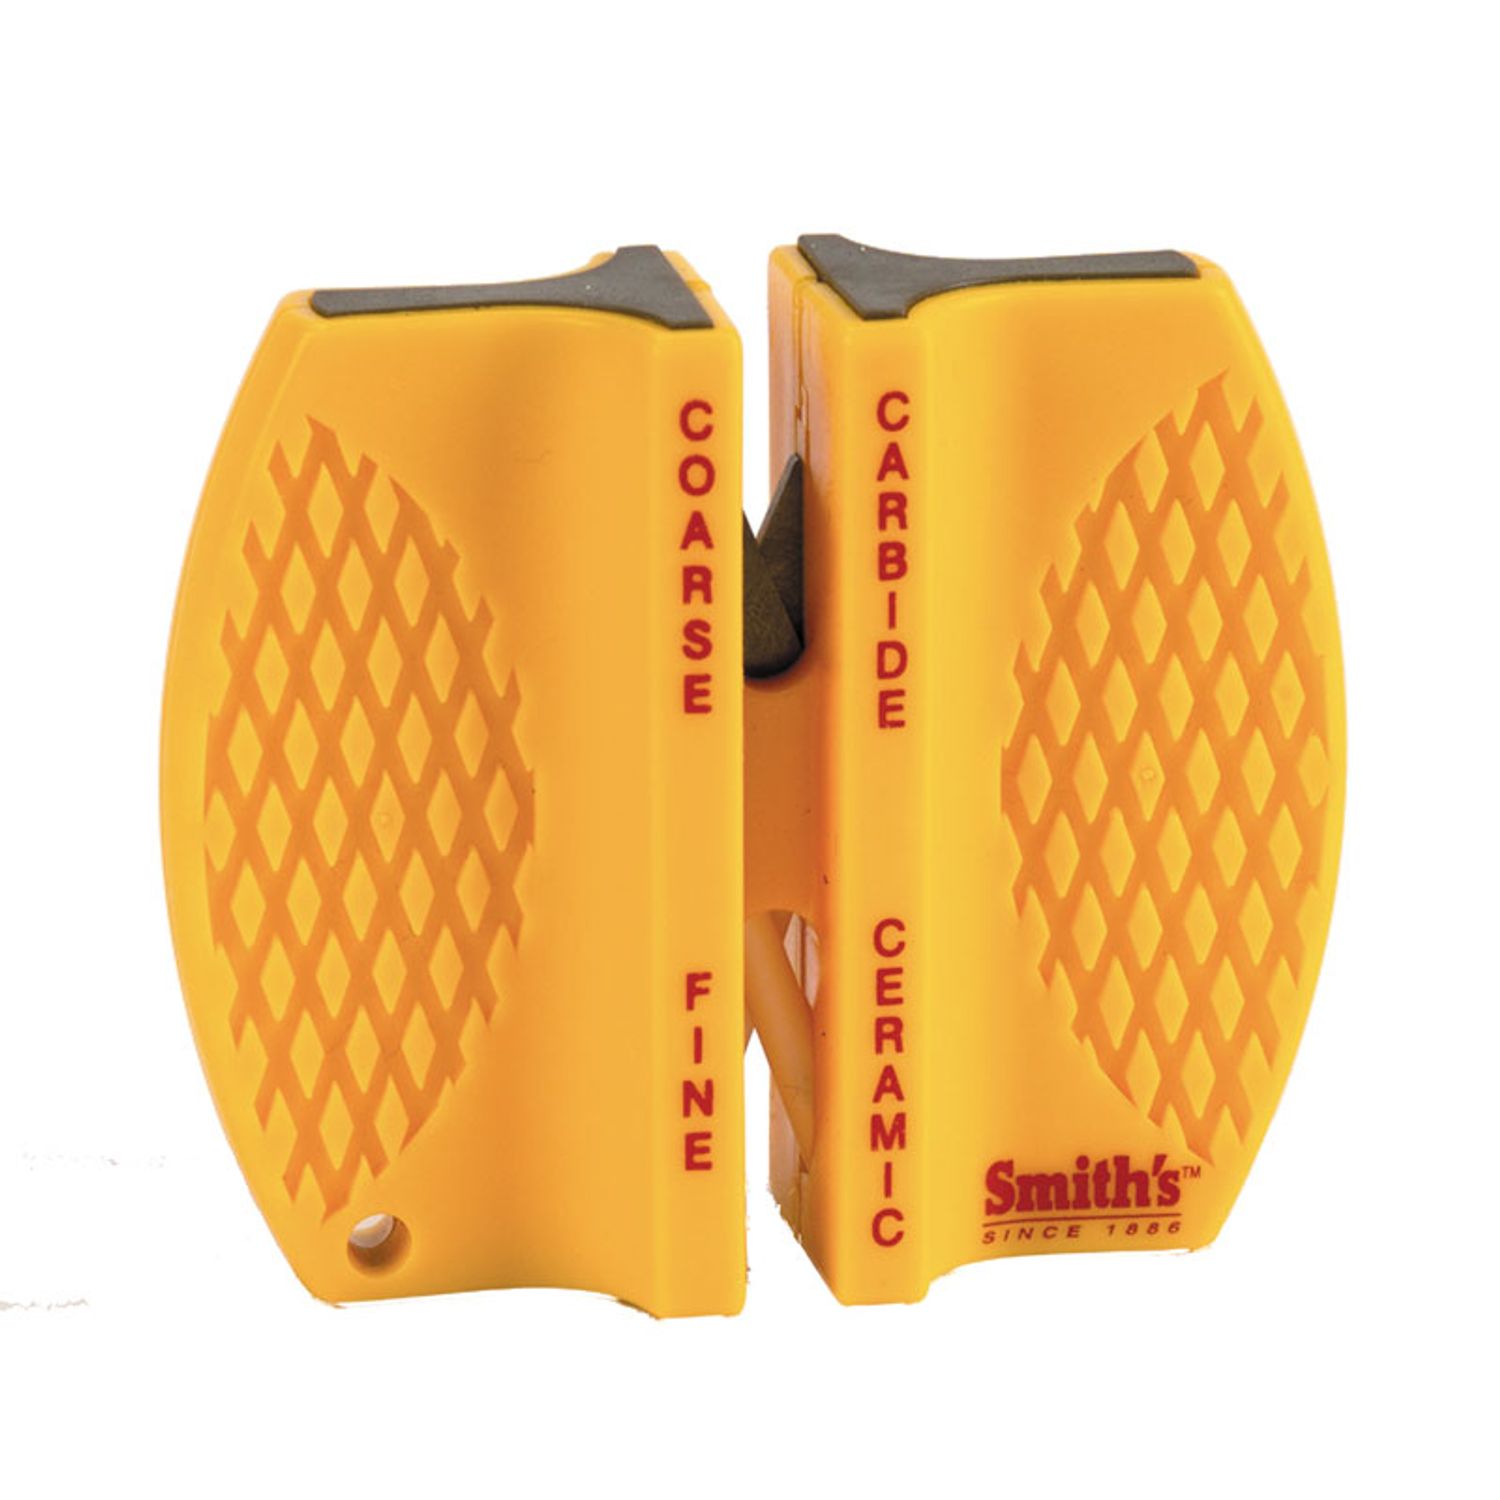 Smiths Jiff-S 10 Second Knife and Scissors Sharpener Yellow